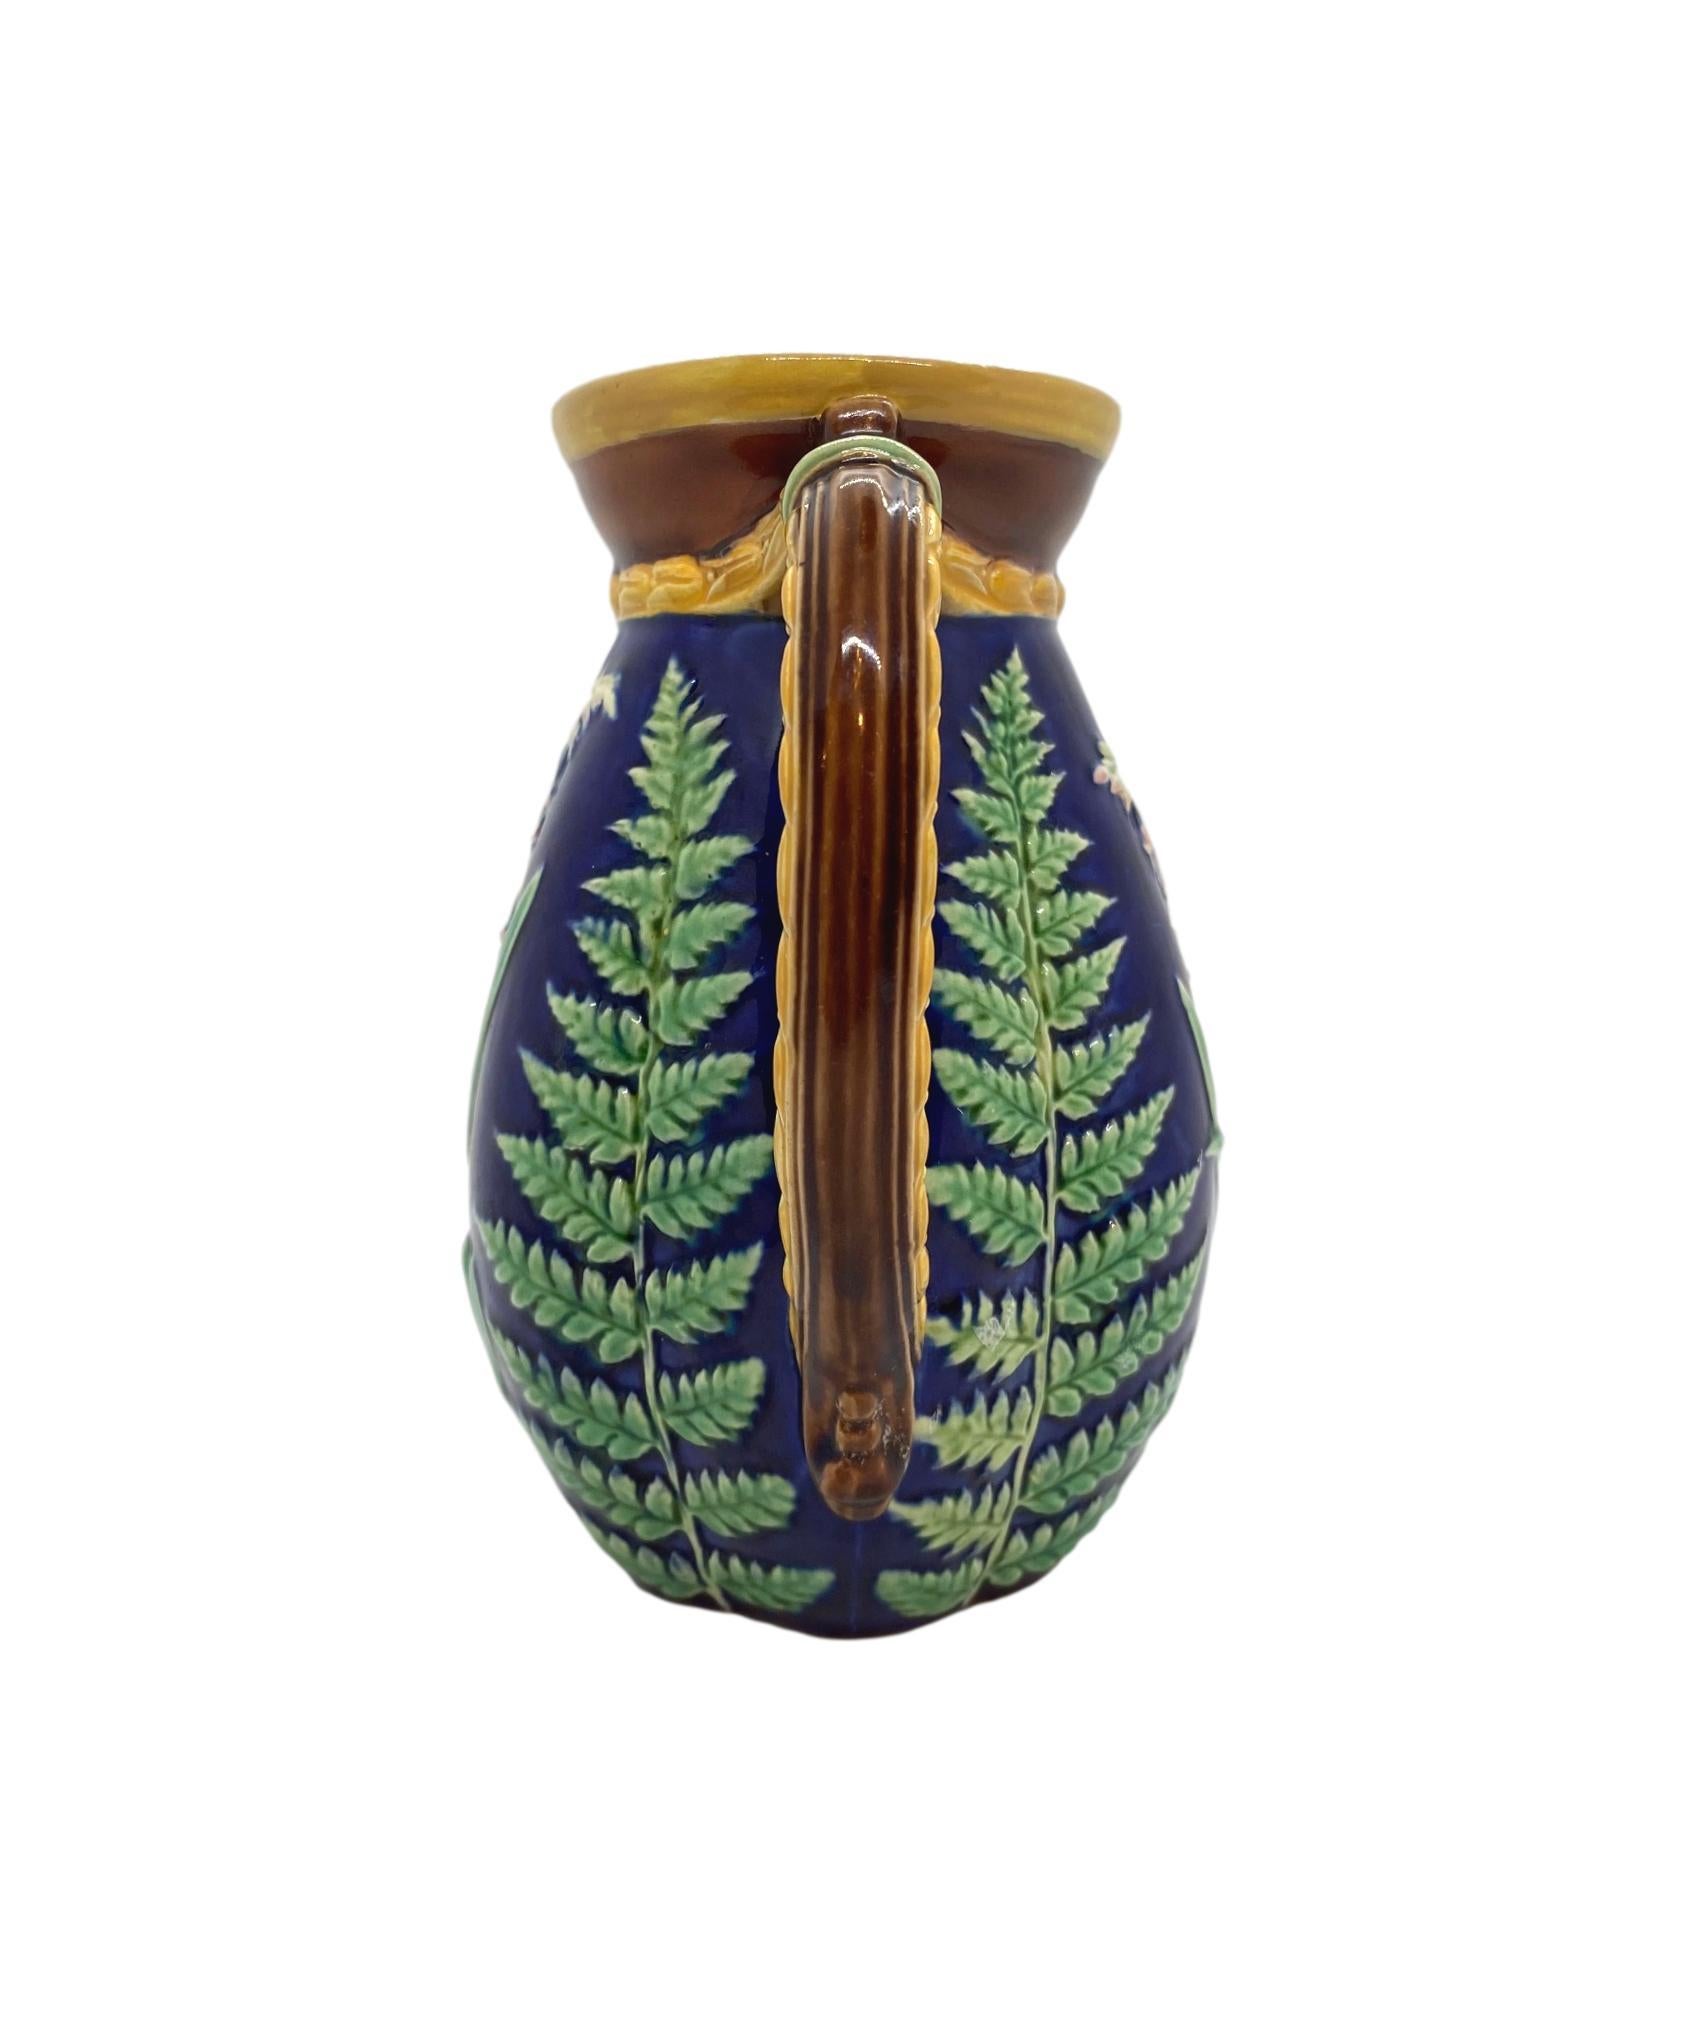 English Brown-Westhead Moore Majolica Pitcher Lilies of the Valley and Ferns on Cobalt